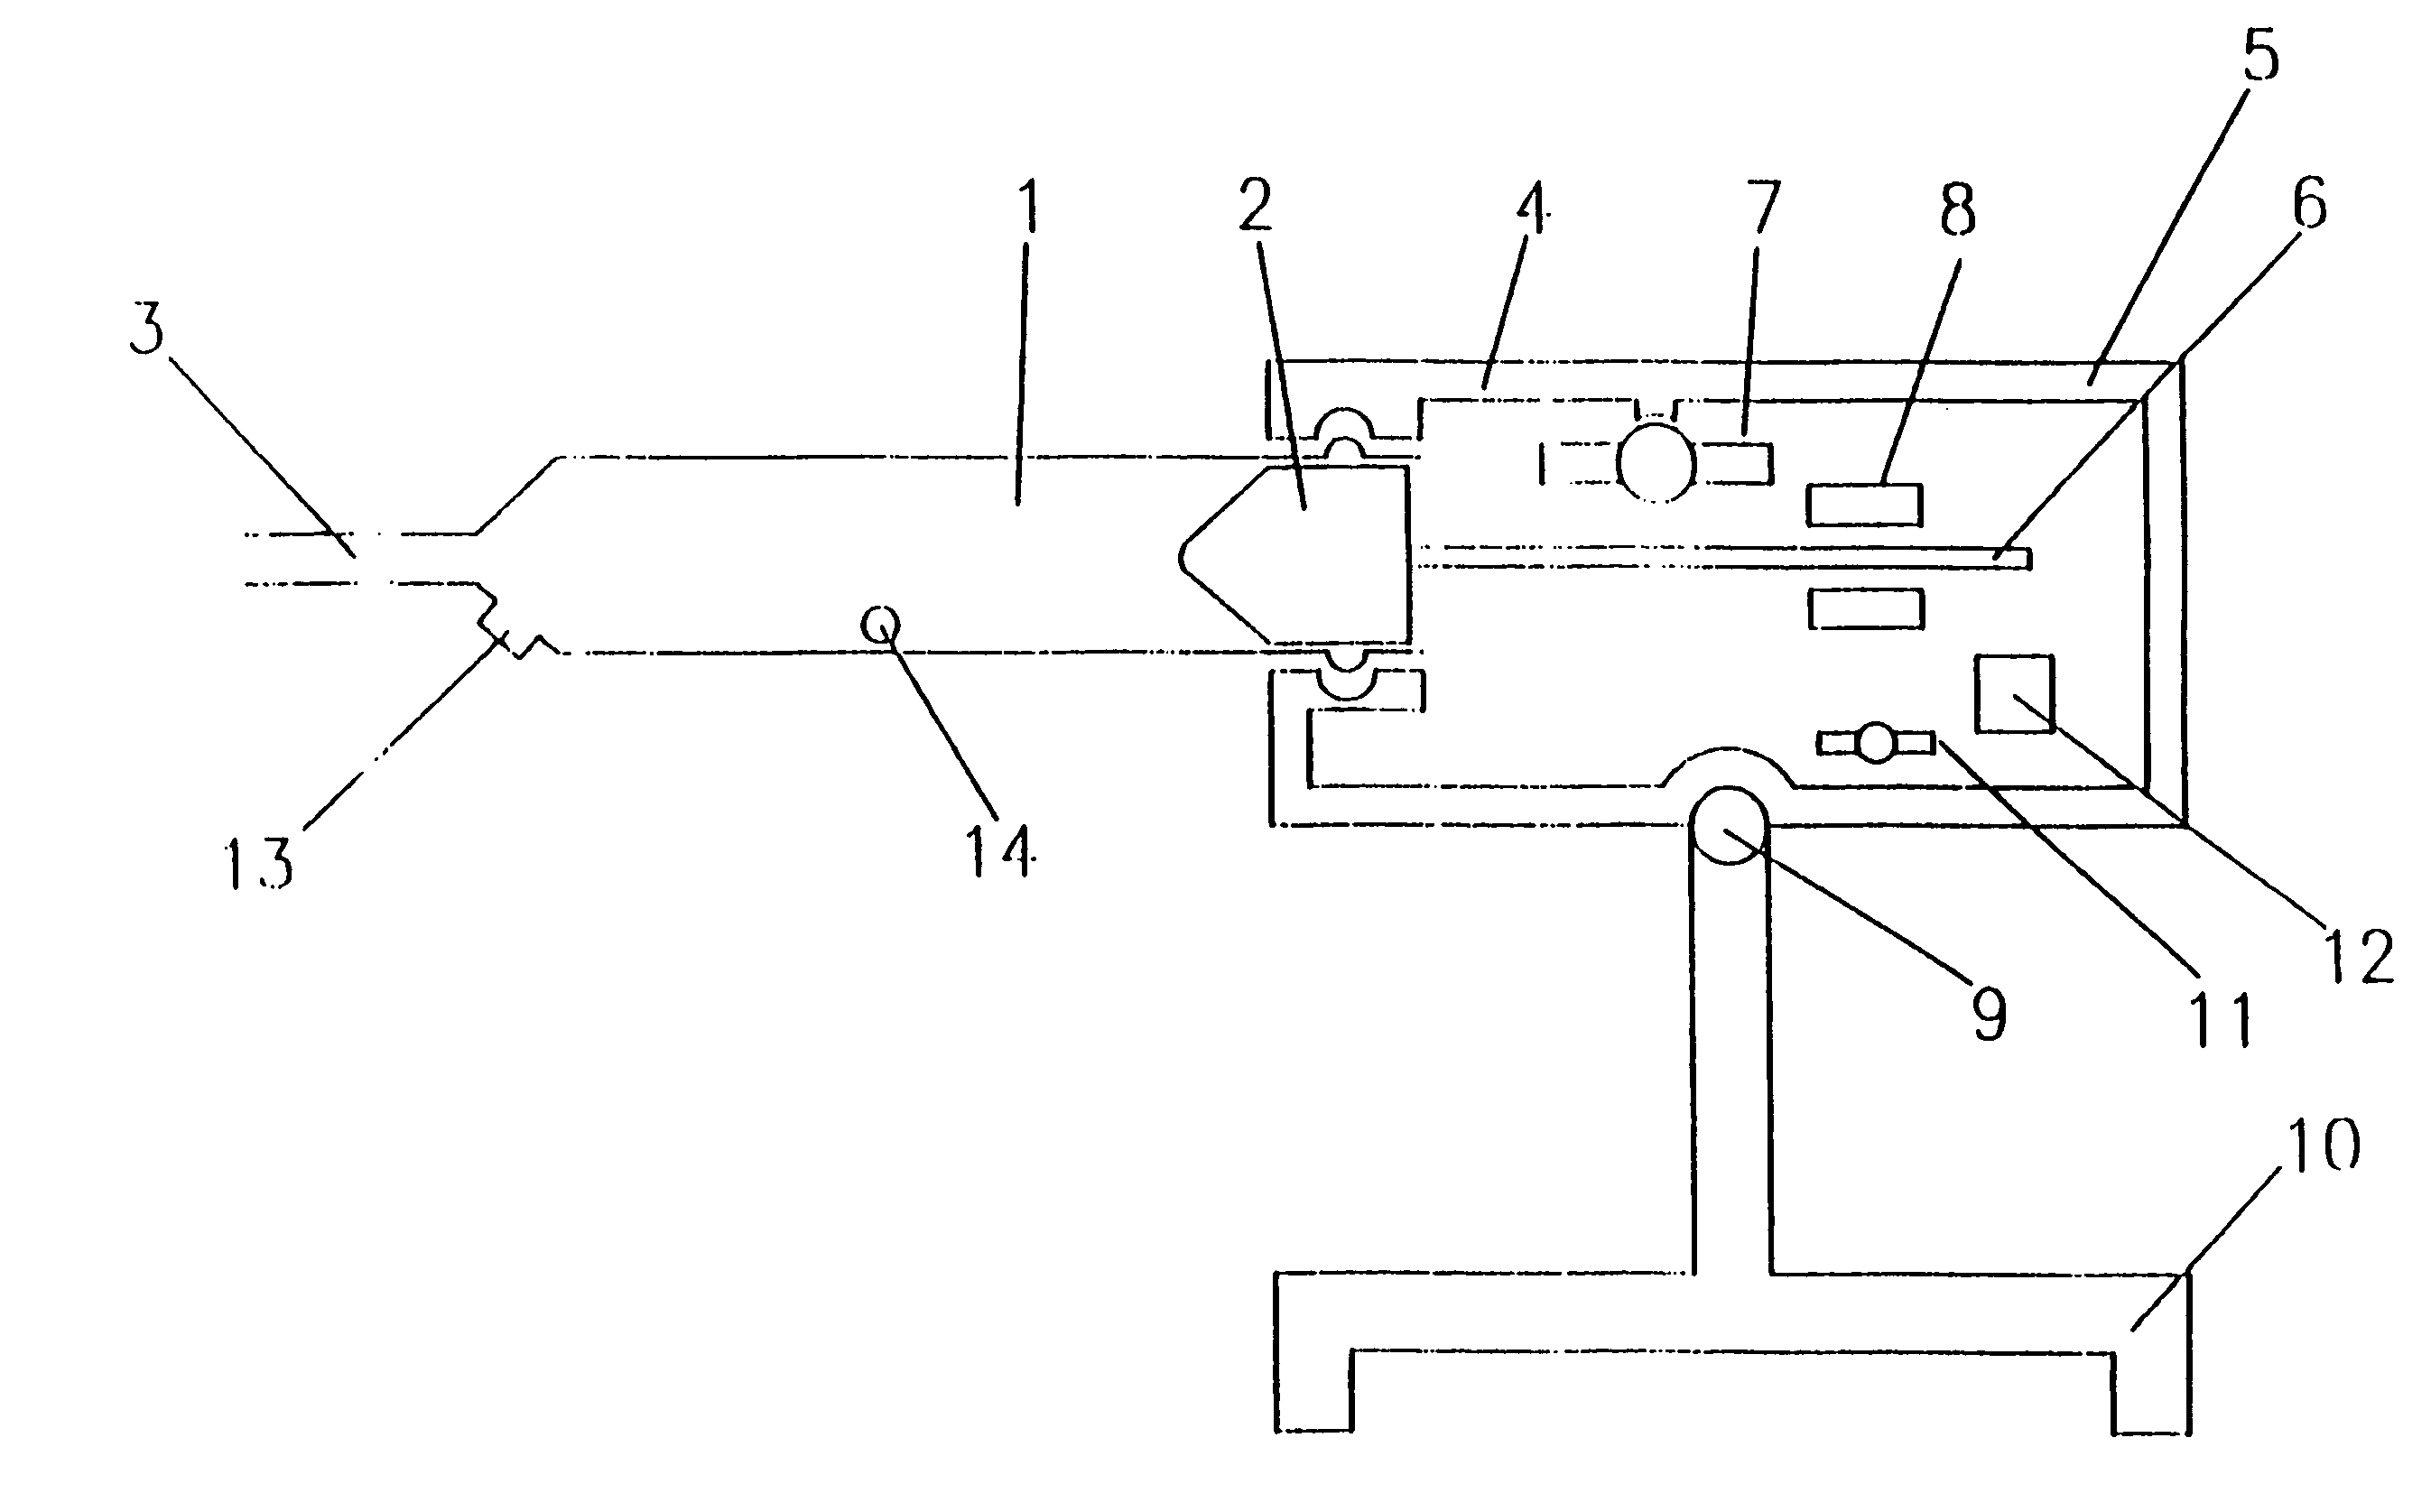 Syringes and injectors incorporating mechanical fluid agitation devices